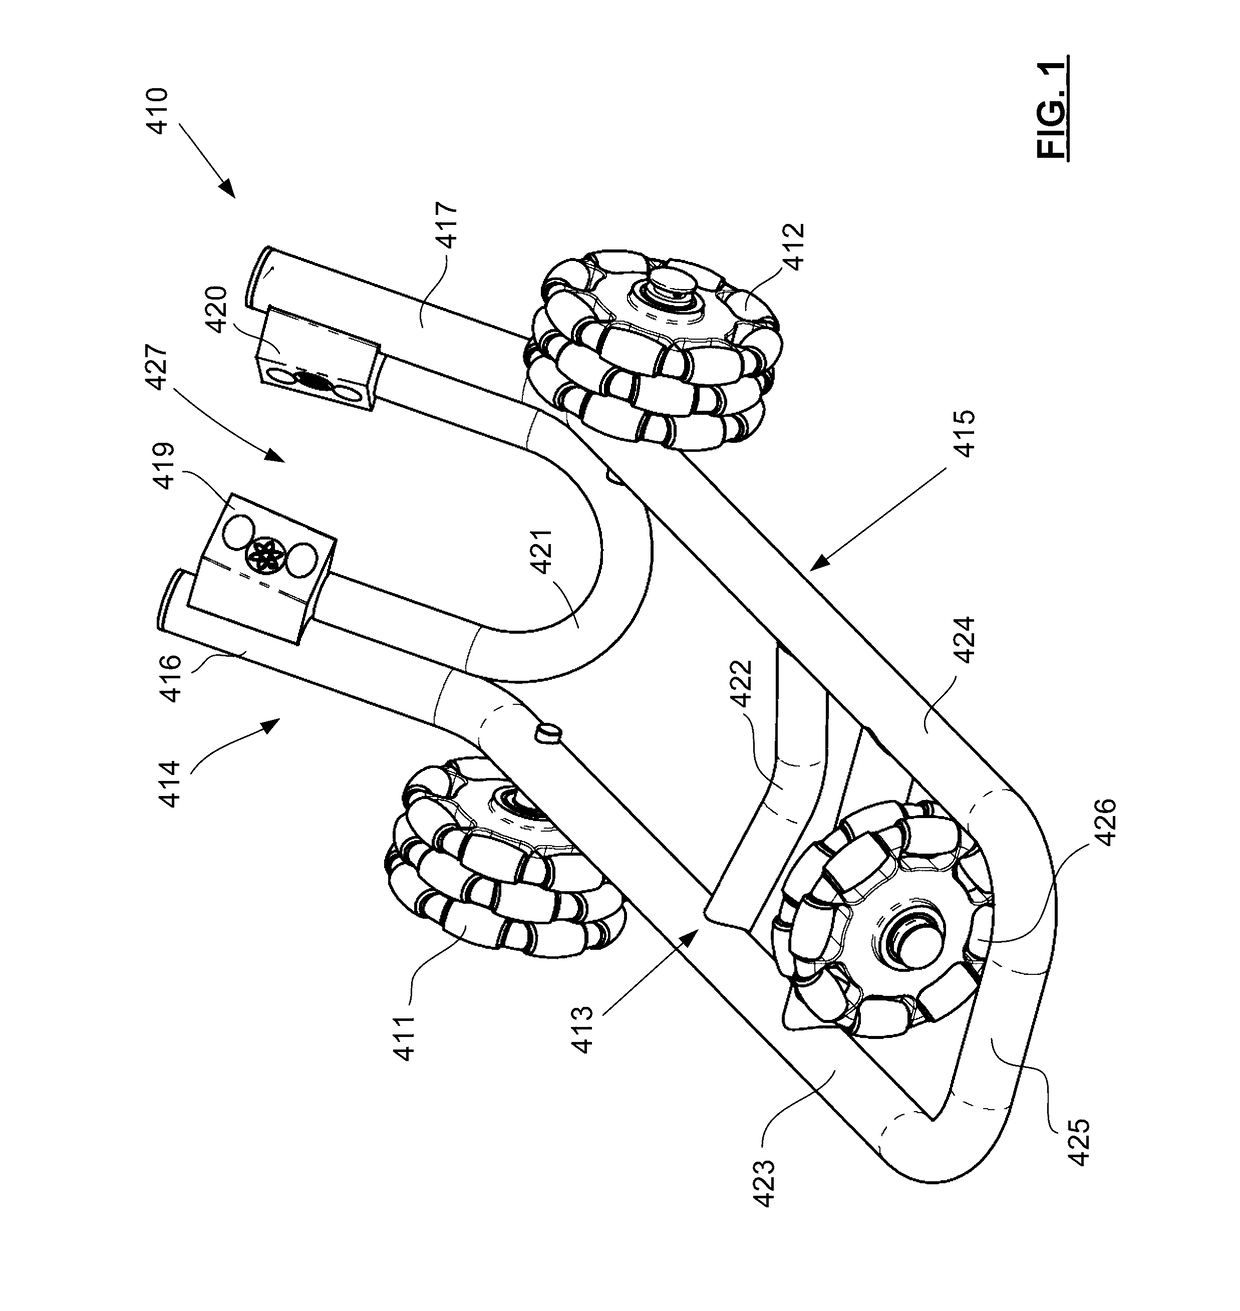 Apparatus for maneuvering parked motorcycles and motor scooters